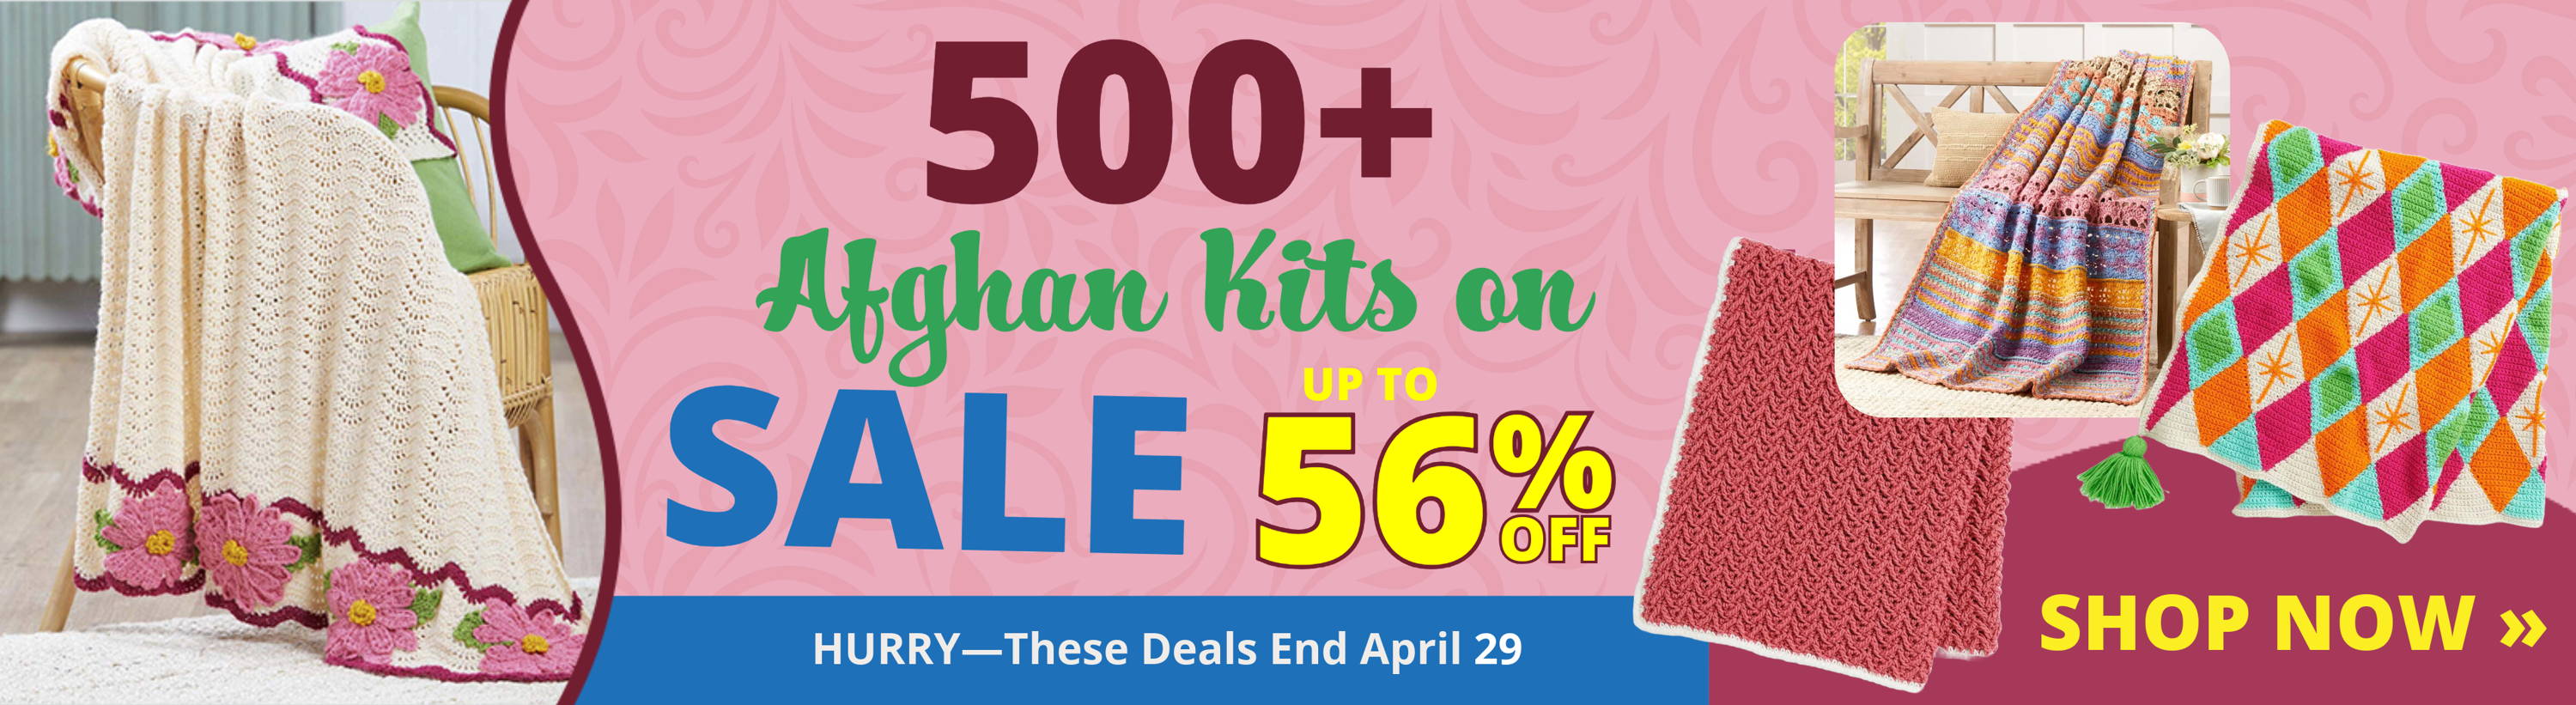 500+ Afghan Kits on Sale up to 56% off until April 29. Image: featured Afghans..